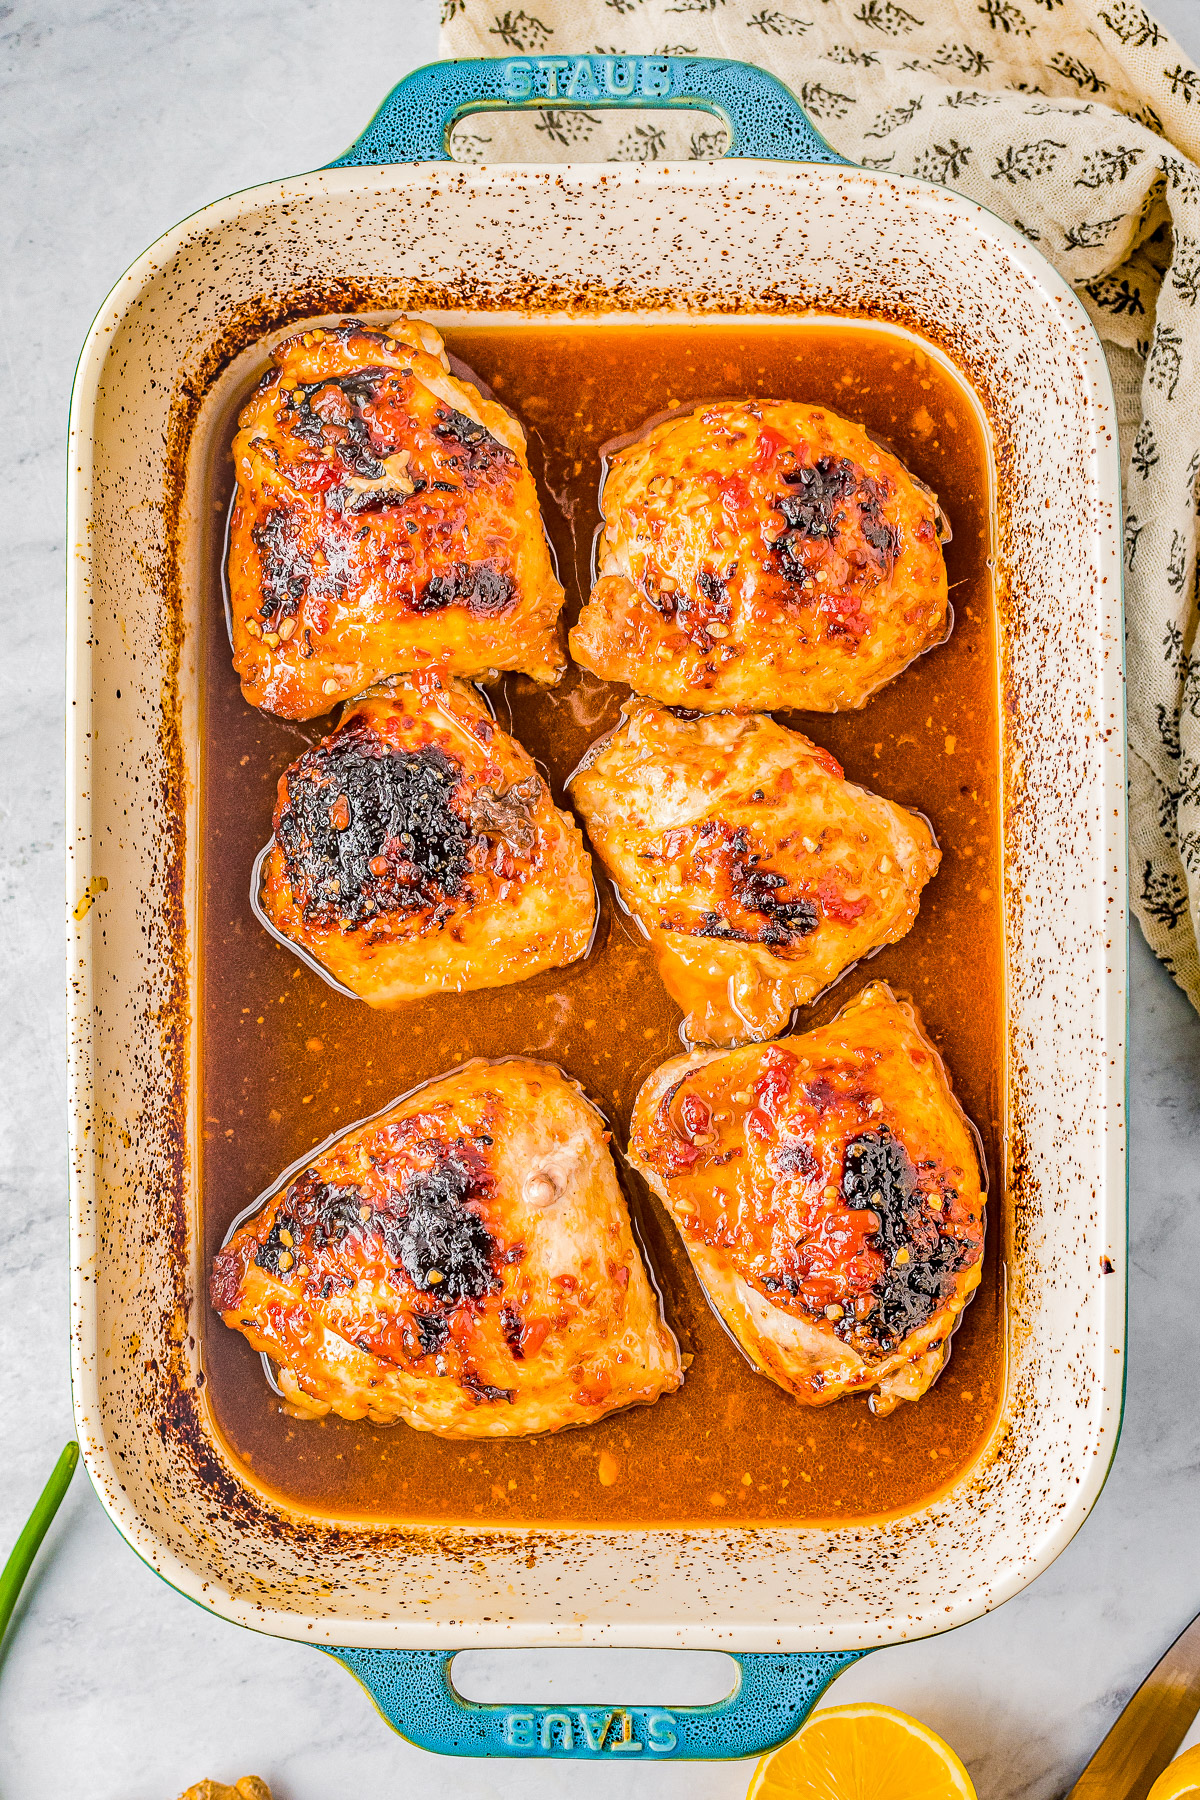 Honey Soy Baked Chicken Thighs - The chicken marinates in the most delectable mixture of soy sauce, honey, garlic, ginger, and more. The resulting baked chicken is SO tender, juicy, moist, and loaded with Asian-inspired flavors! Even better, this is a one-pan, EASY recipe the whole family will adore! 